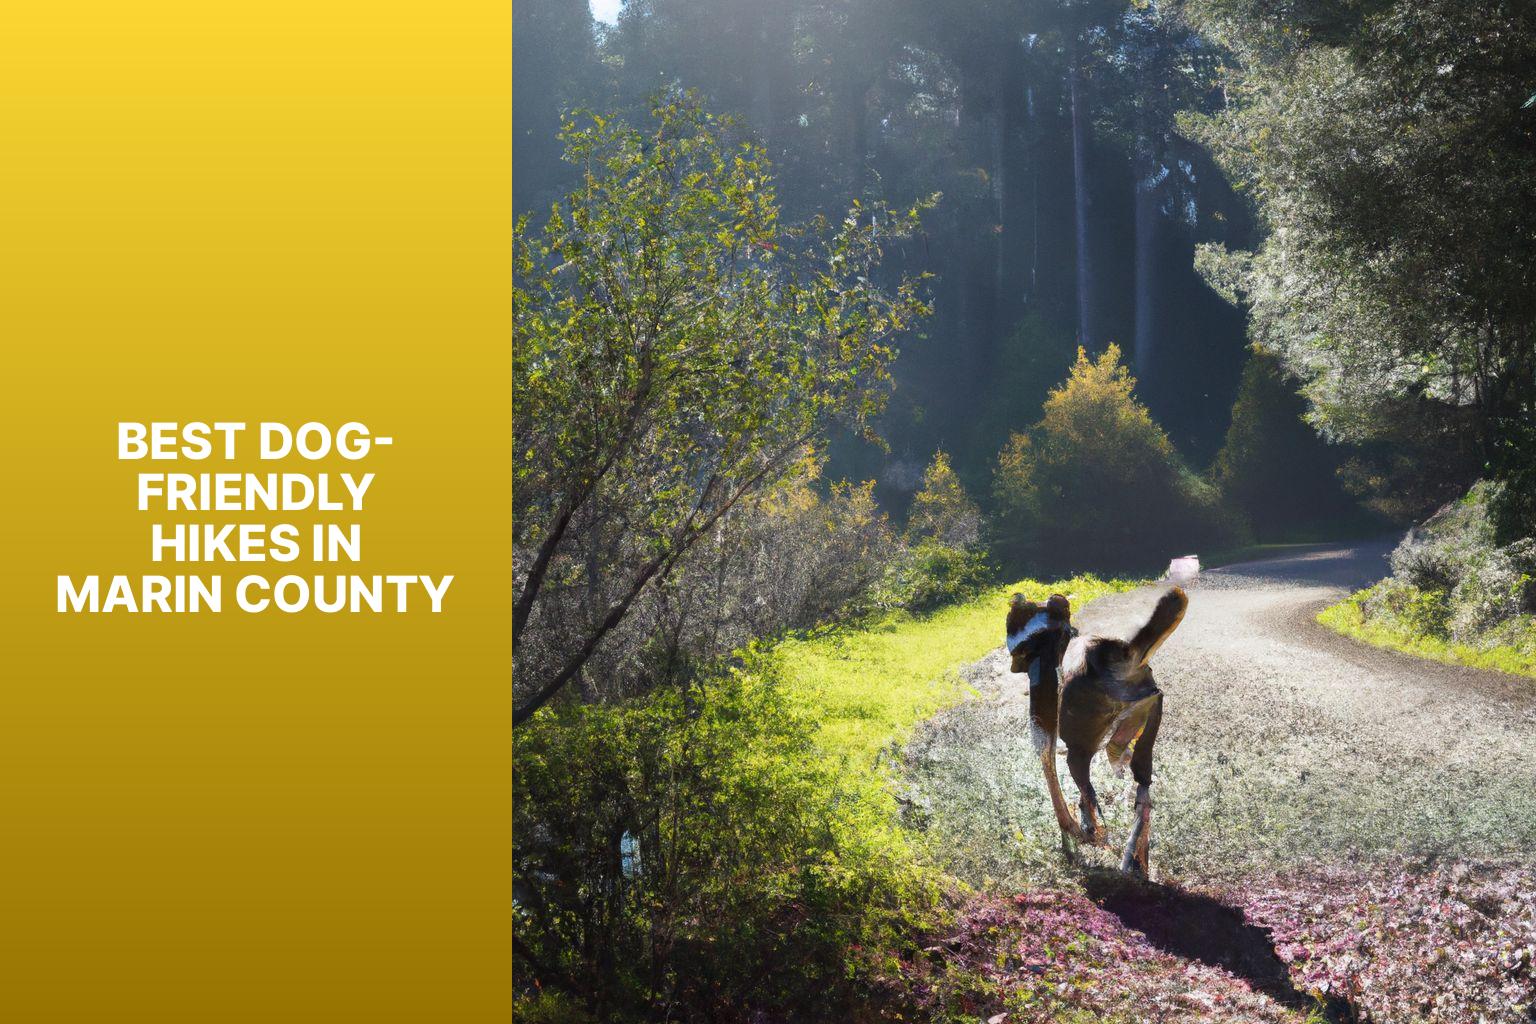 Best Dog-Friendly Hikes in Marin County - Dog Friendly Hikes in Marin 